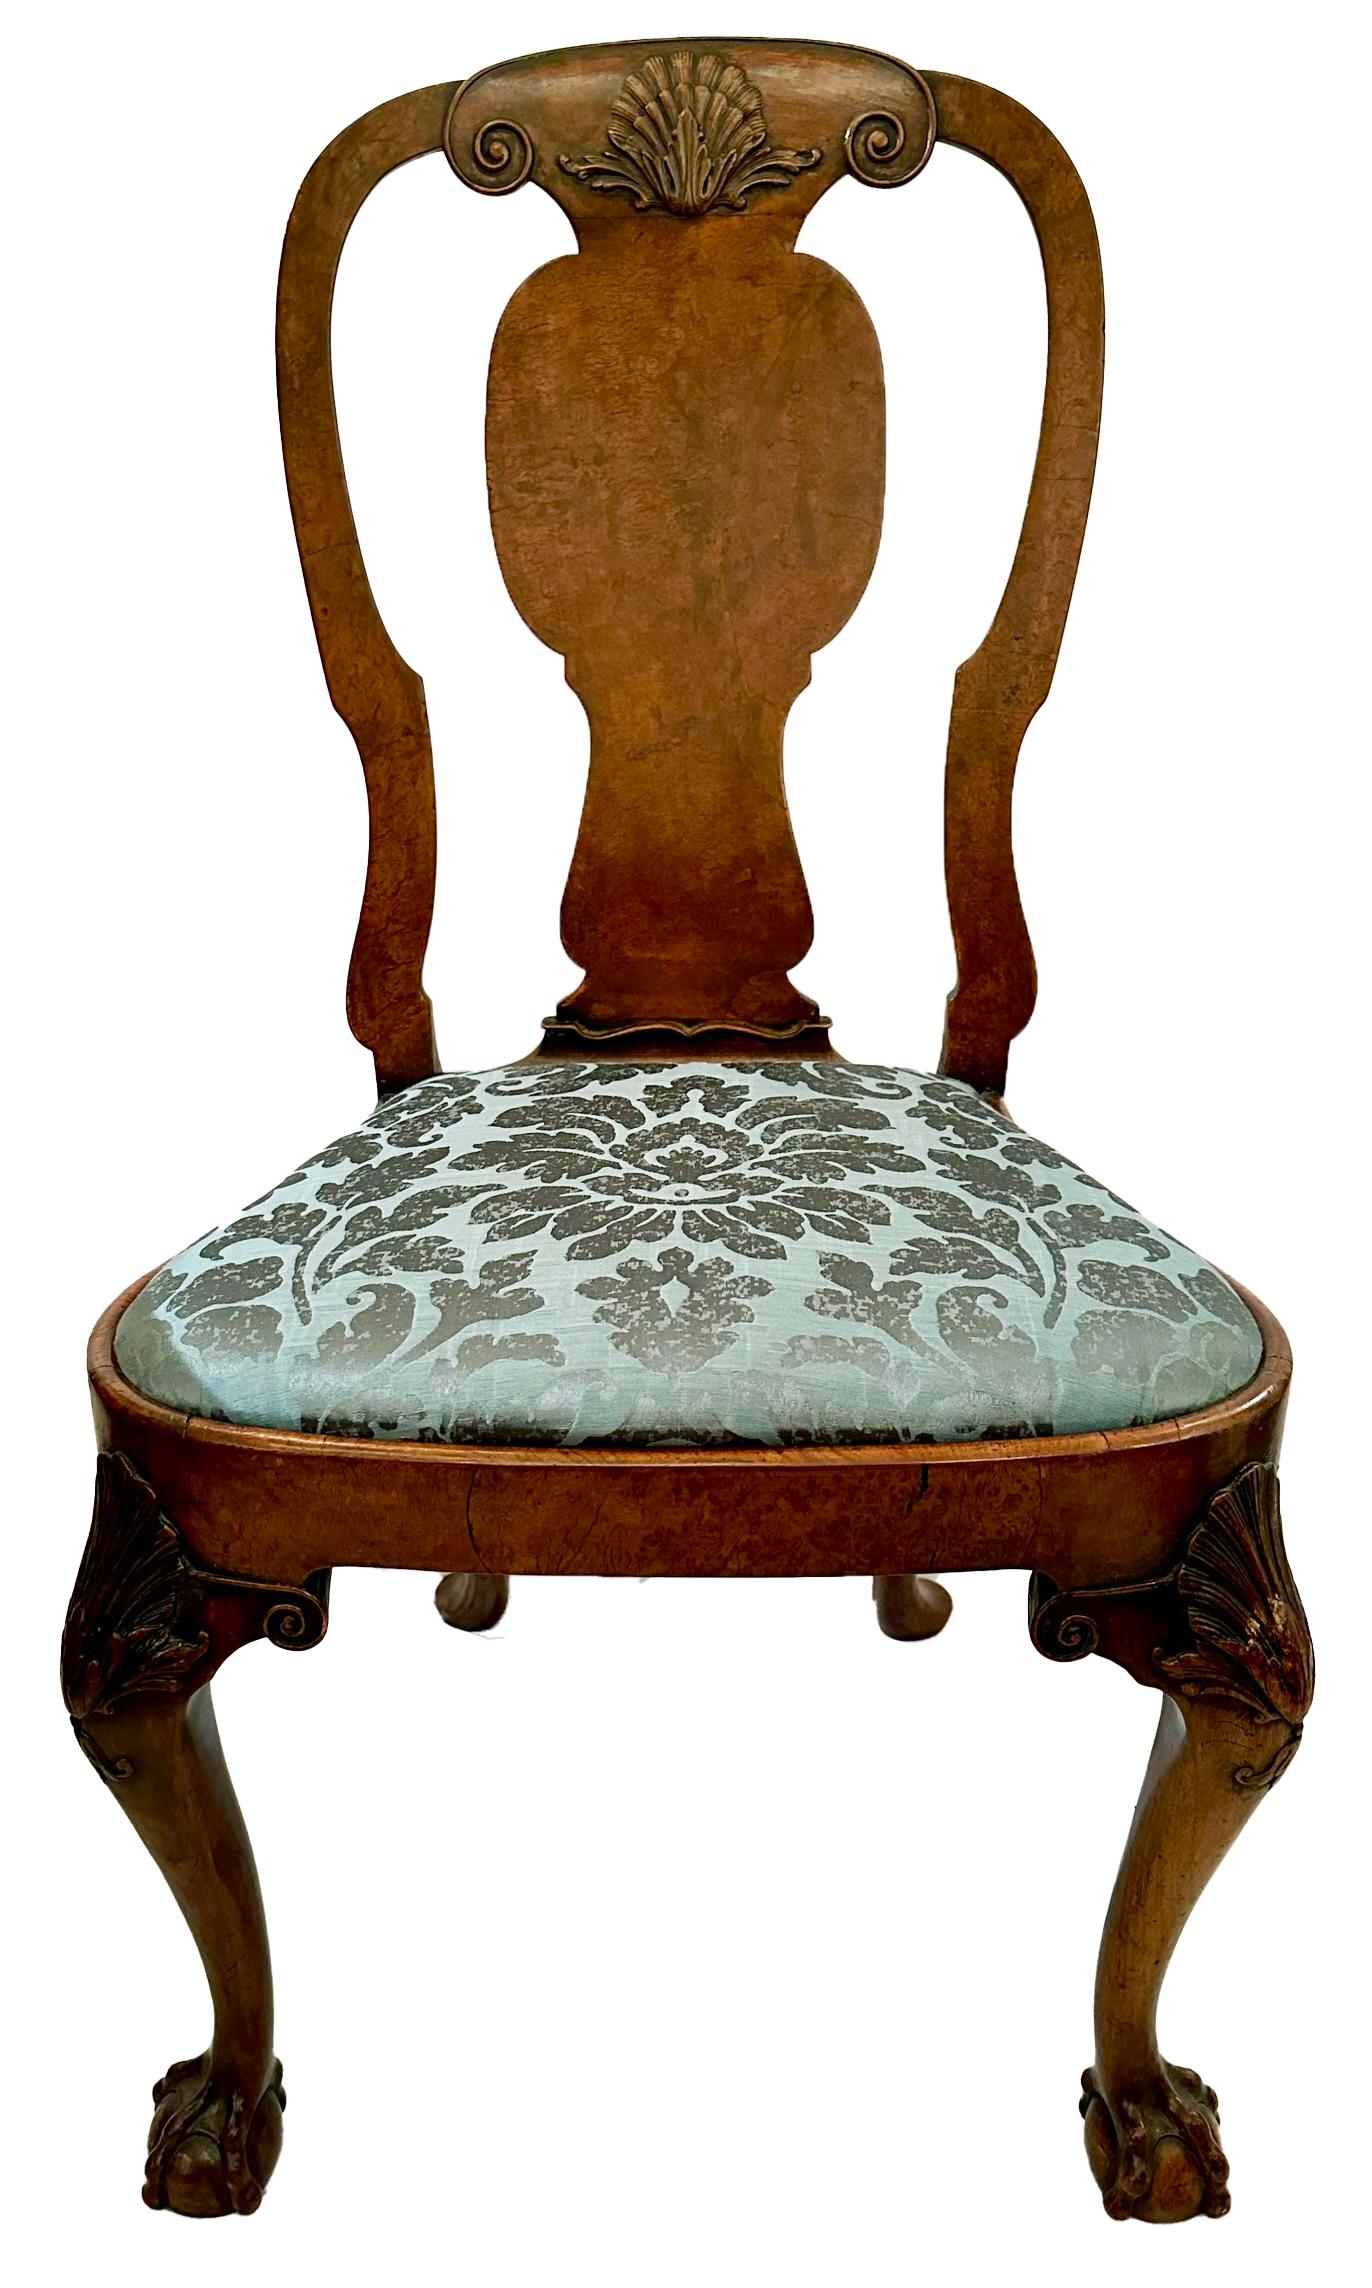 Set of 12 Antique English Burled Walnut Queen Anne Dining Chairs, Circa 1890.
10 Sidechairs:  39 1/2